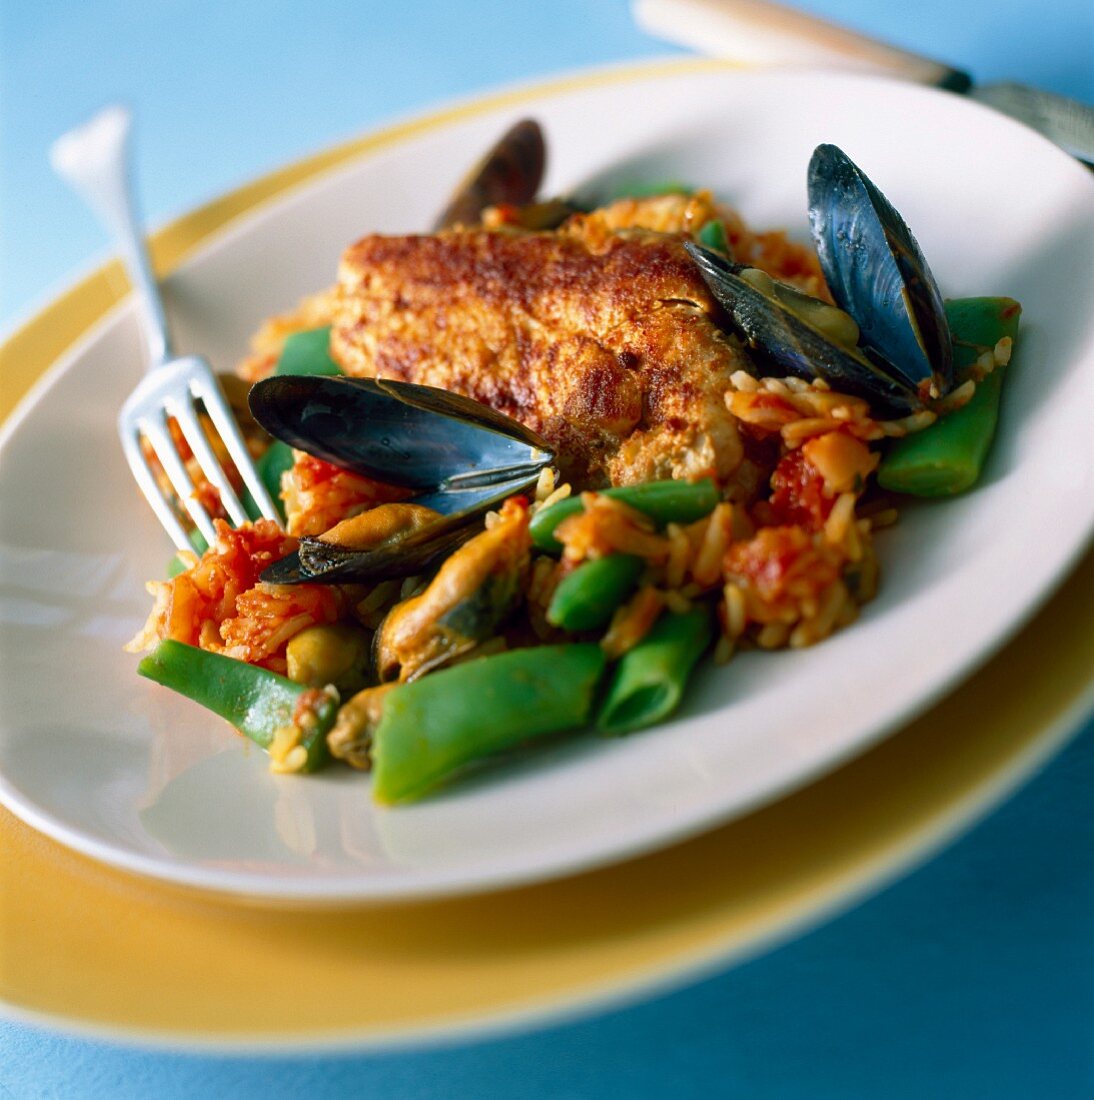 Chicken pilaf with mussels and saffron rice